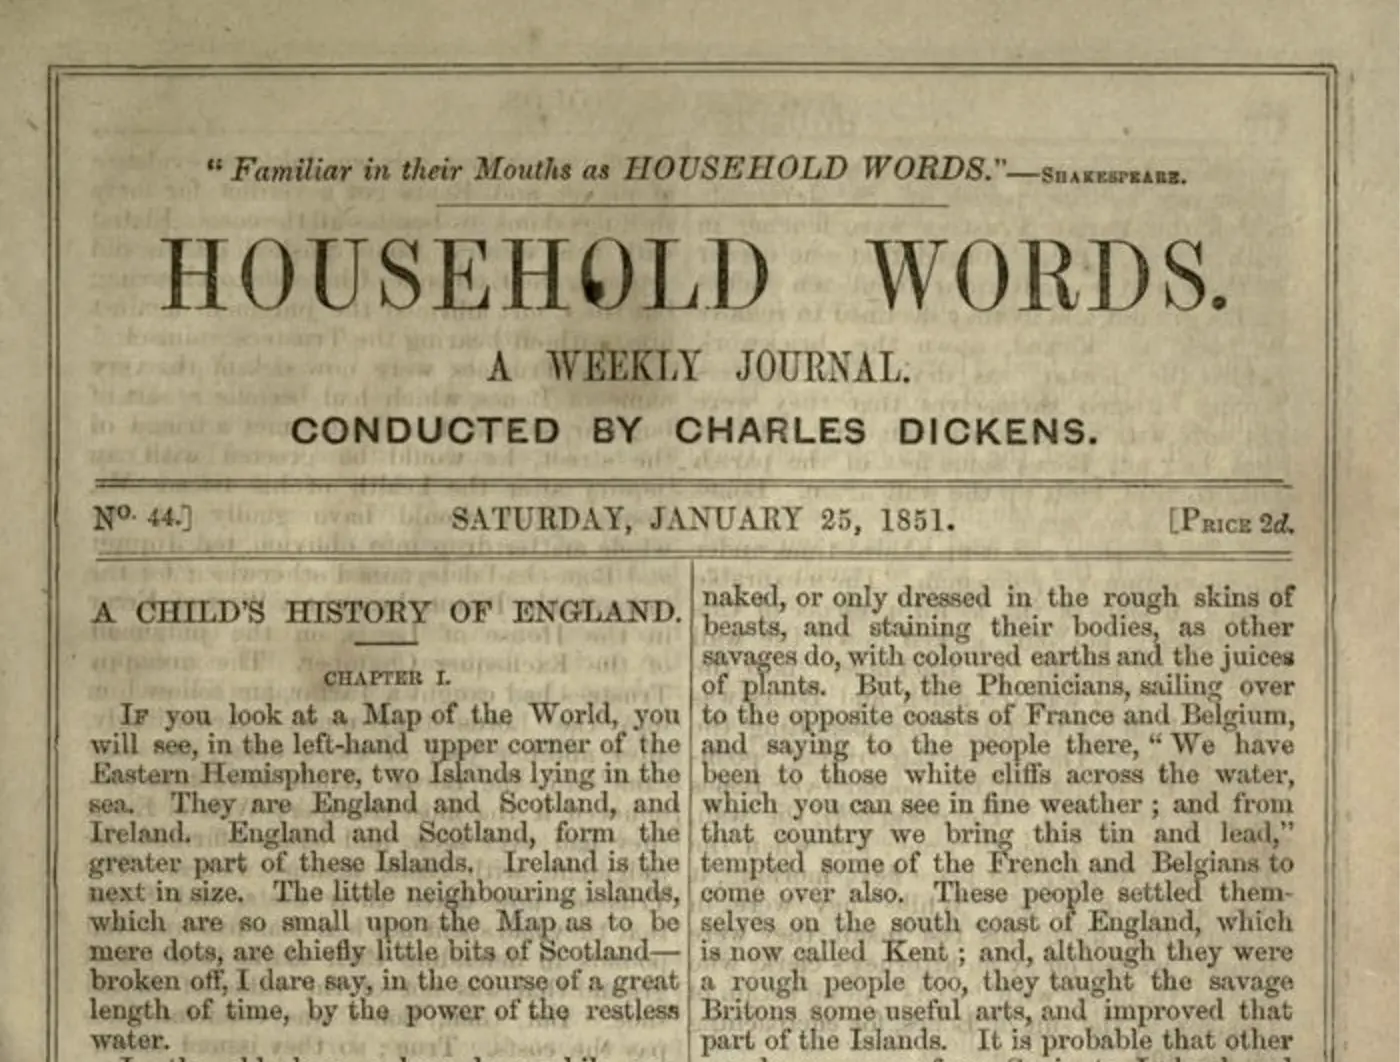 Dickens’s A Child’s History of England in the January 1851 issue of Household Words